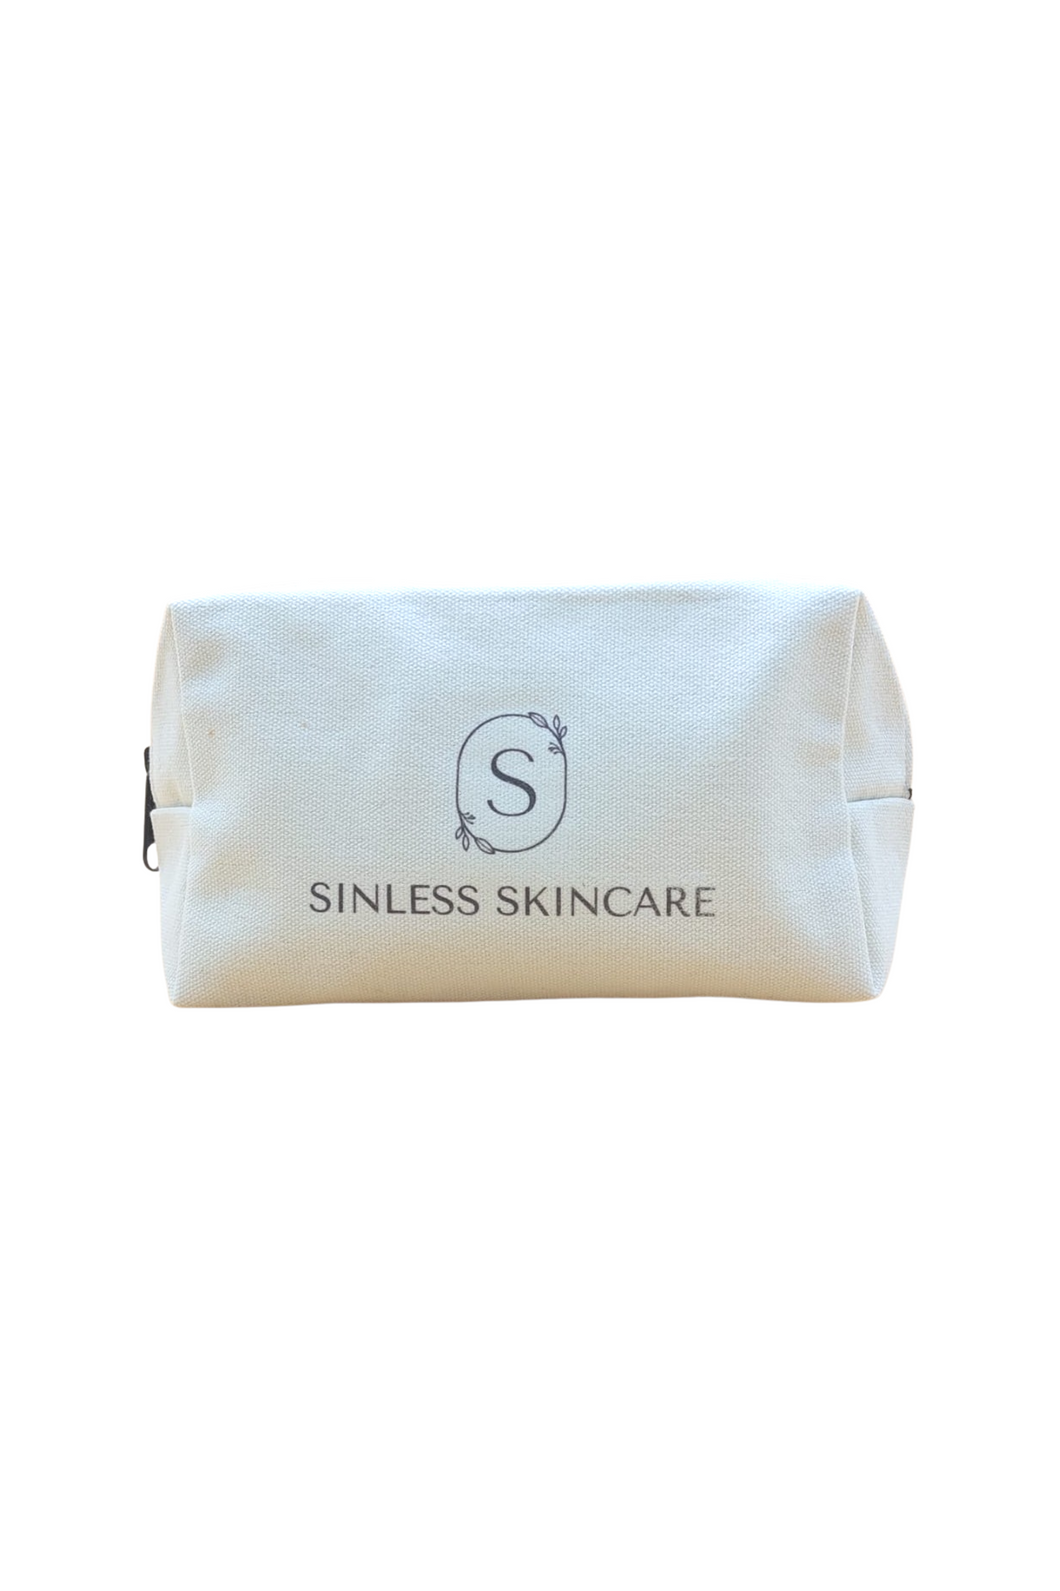 Sinless Skincare Travel Pouch